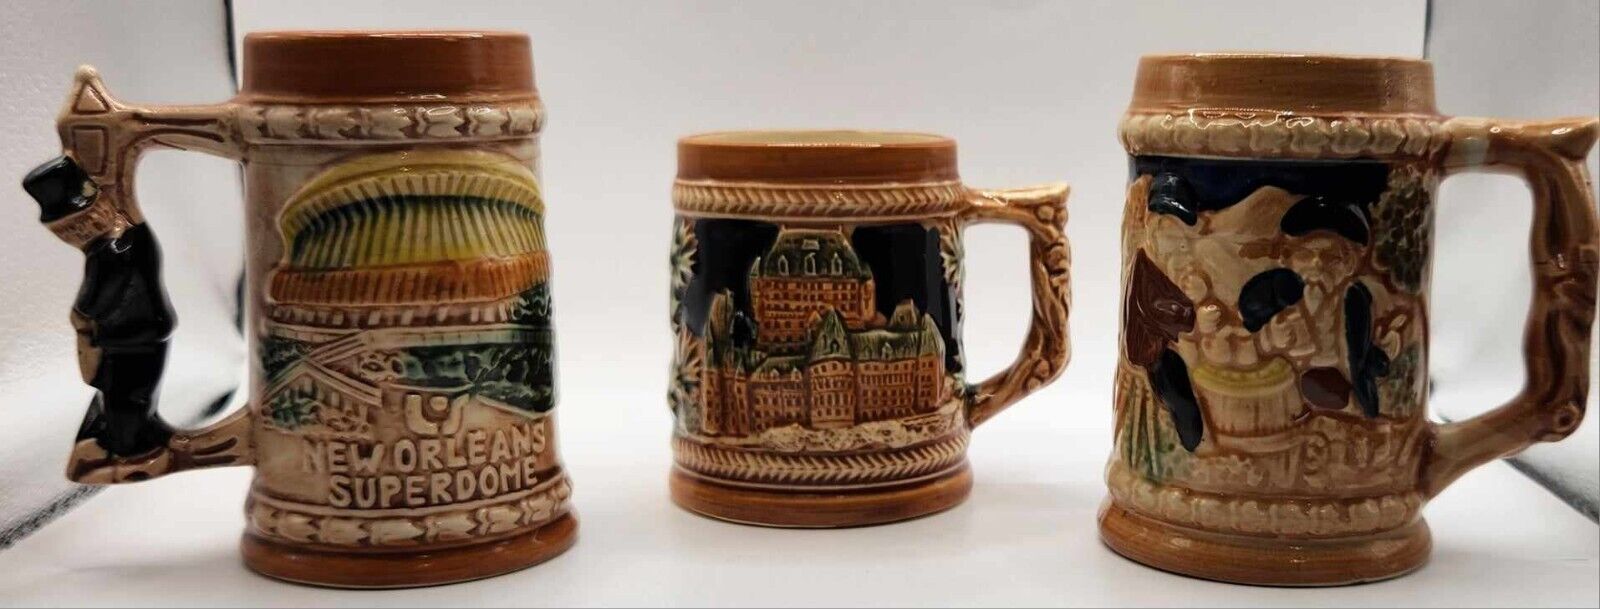 Set of 3 Small Collectable Ceramic Beer Steins (Read Description)